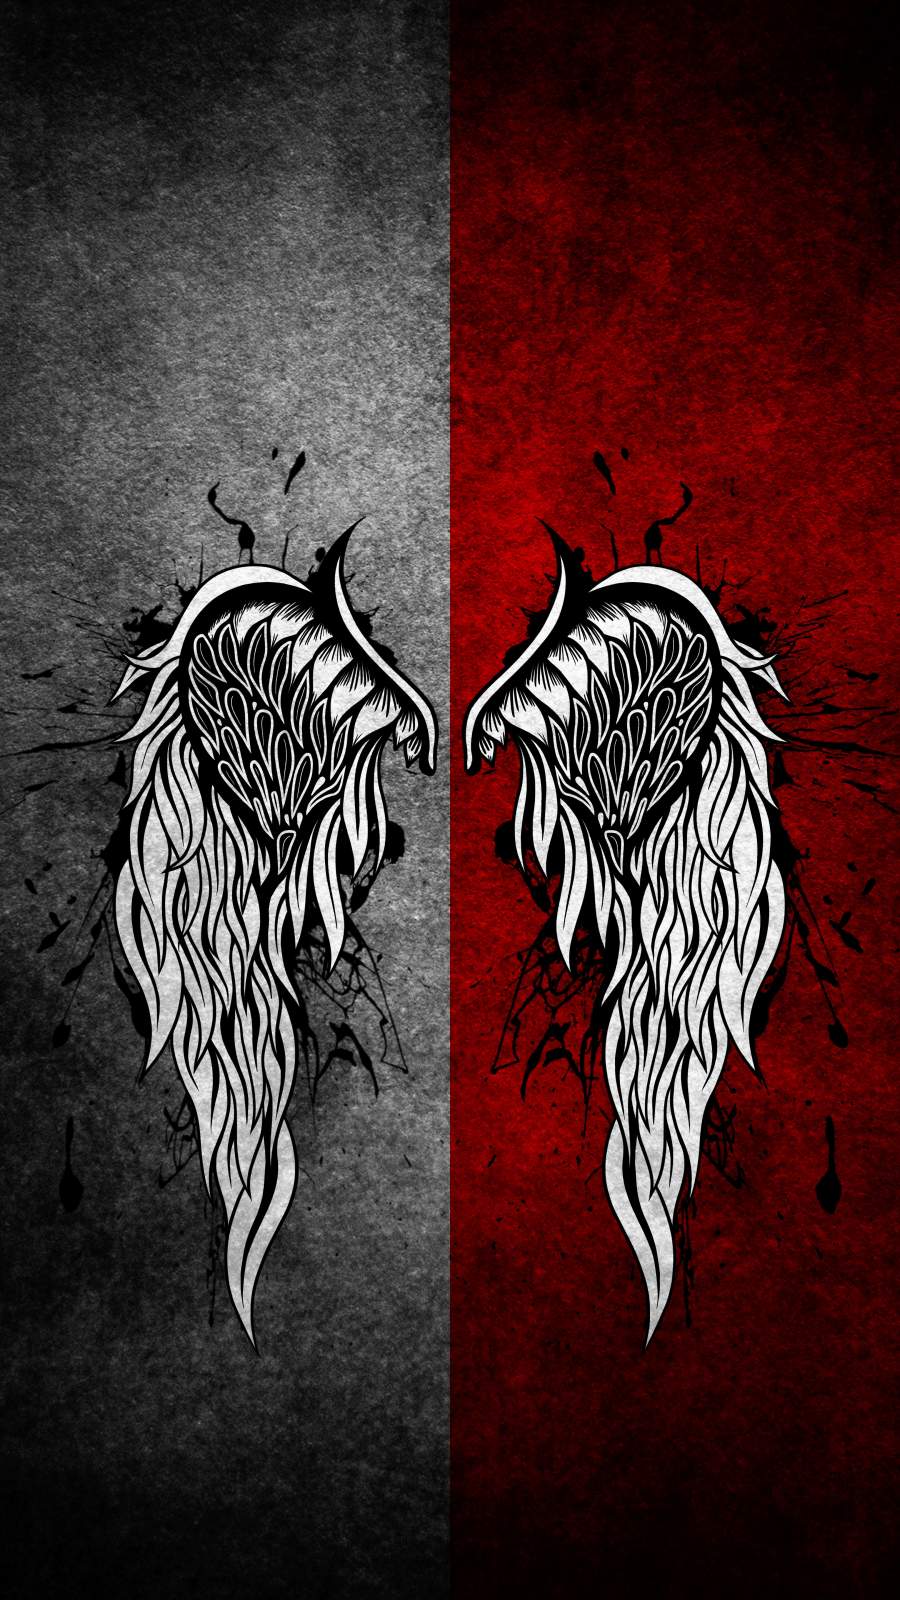 IPhone wallpaper with angel wings. - Wings